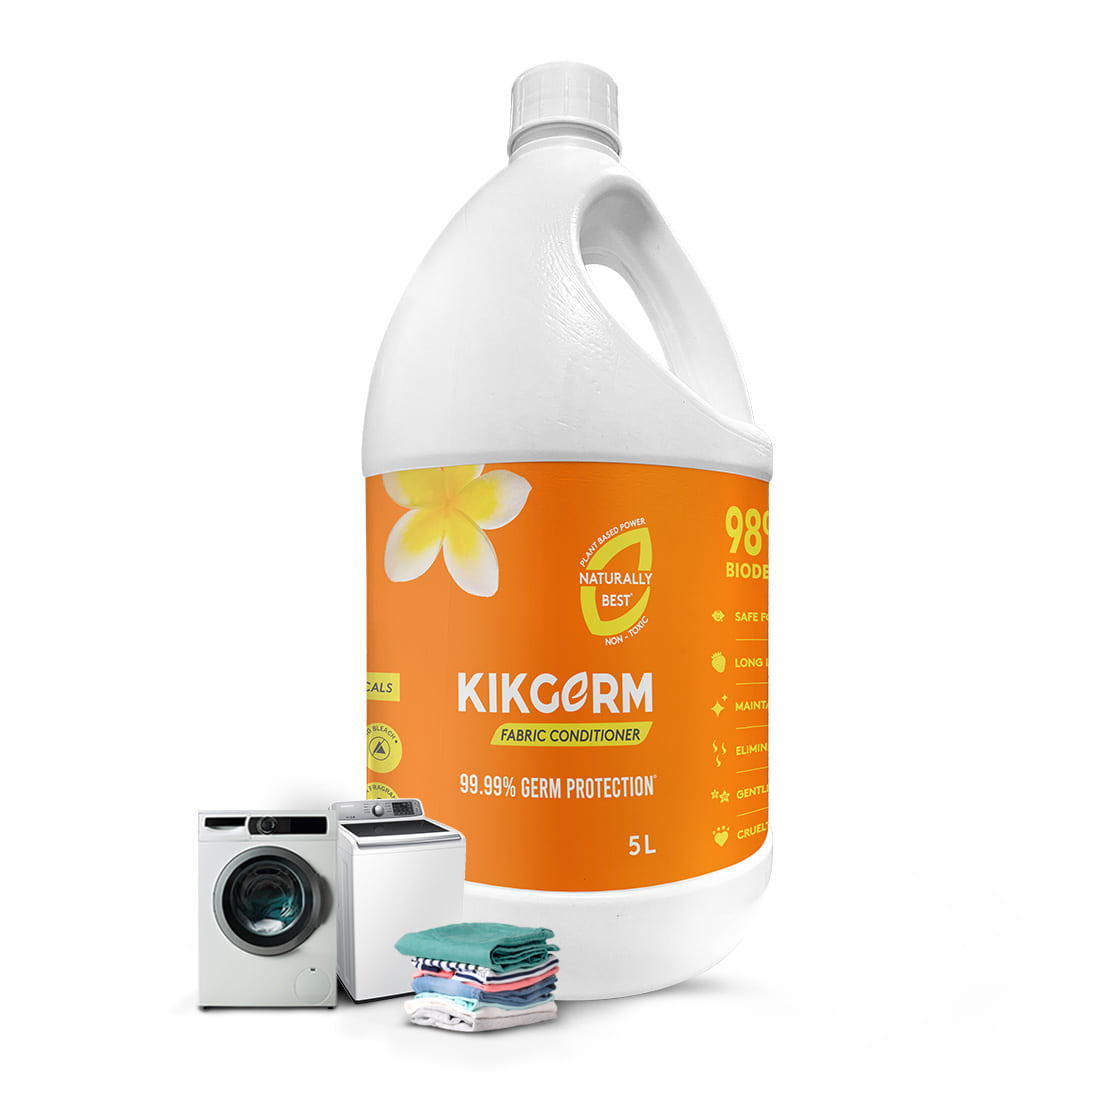 KIKGERM Naturally Best Fabric Conditioner | No Harmful Chemicals & 99.99% Germ Protection | New & Shiny Clothes | 5 Litr